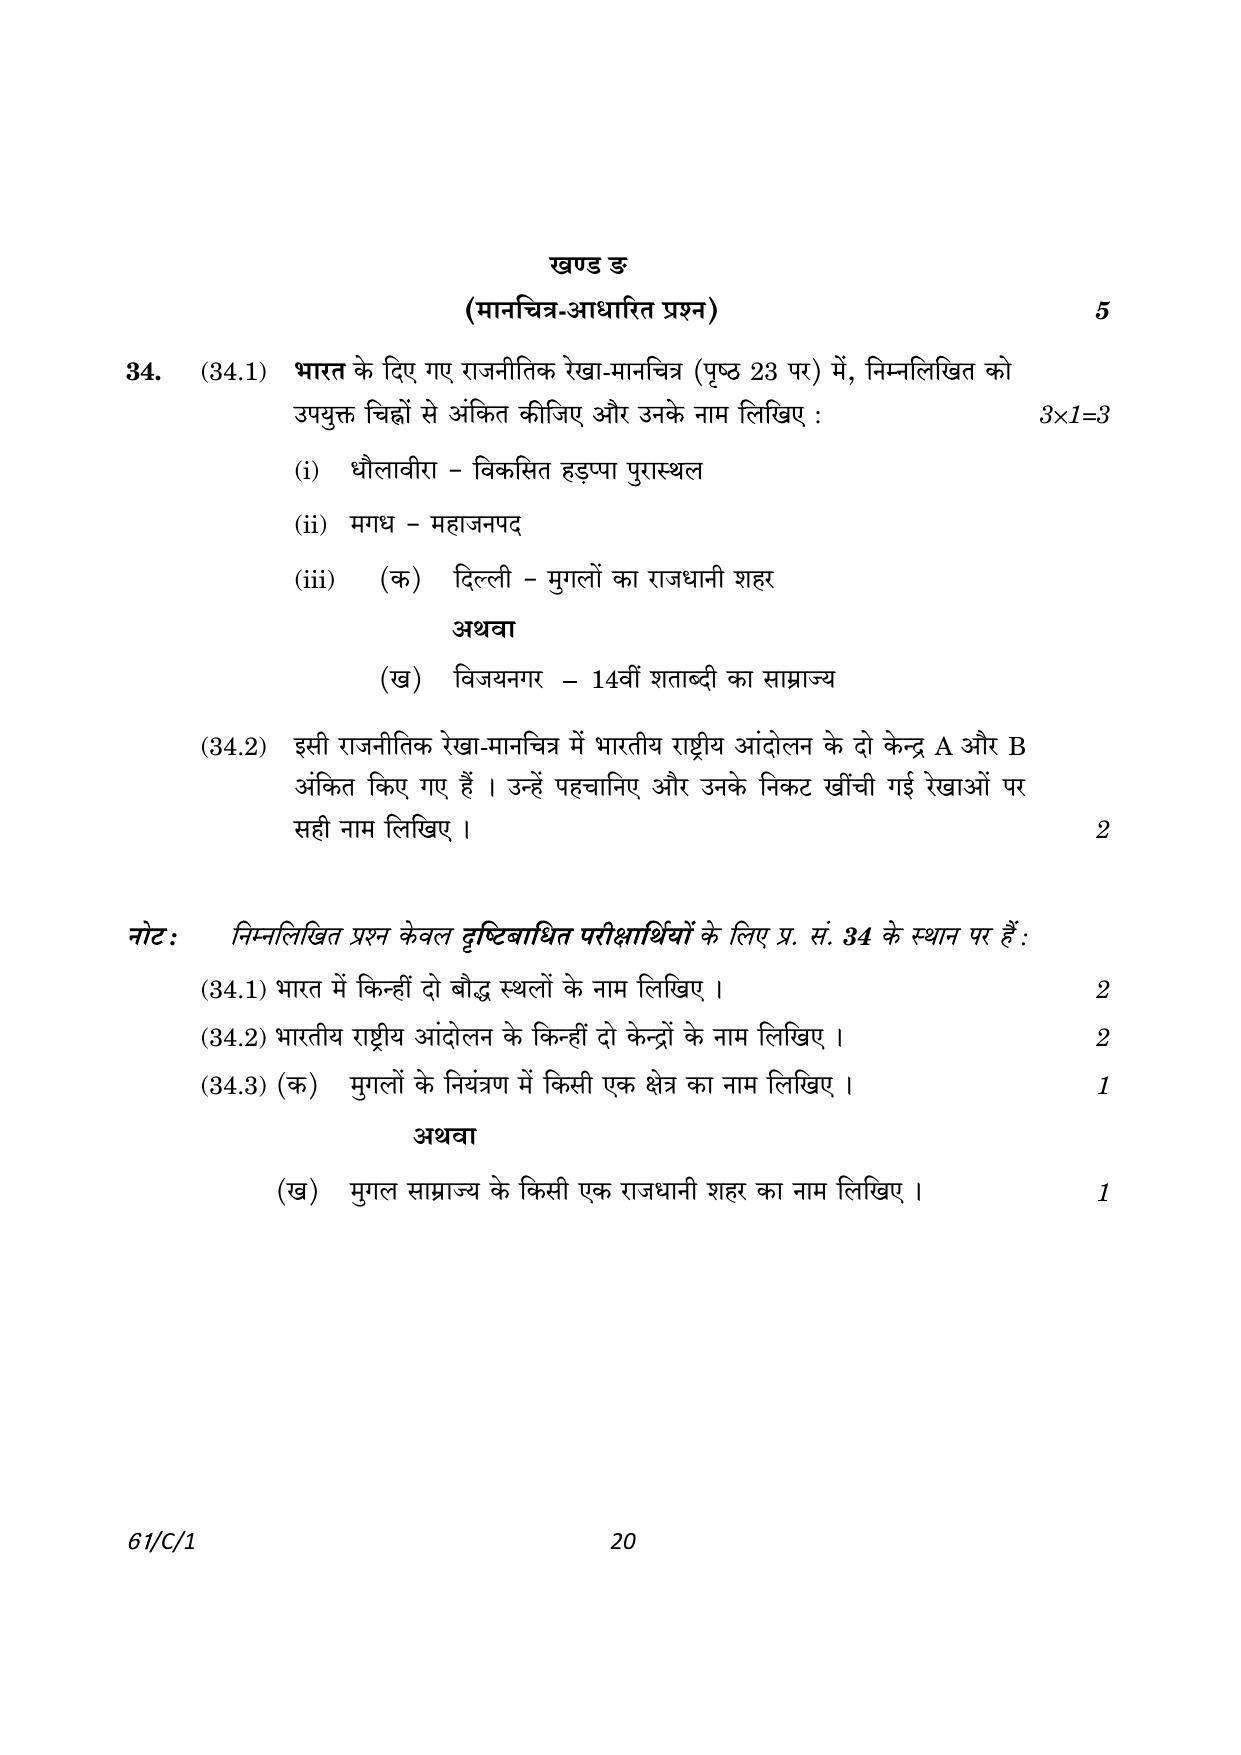 CBSE Class 12 61-1 History 2023 (Compartment) Question Paper - Page 20